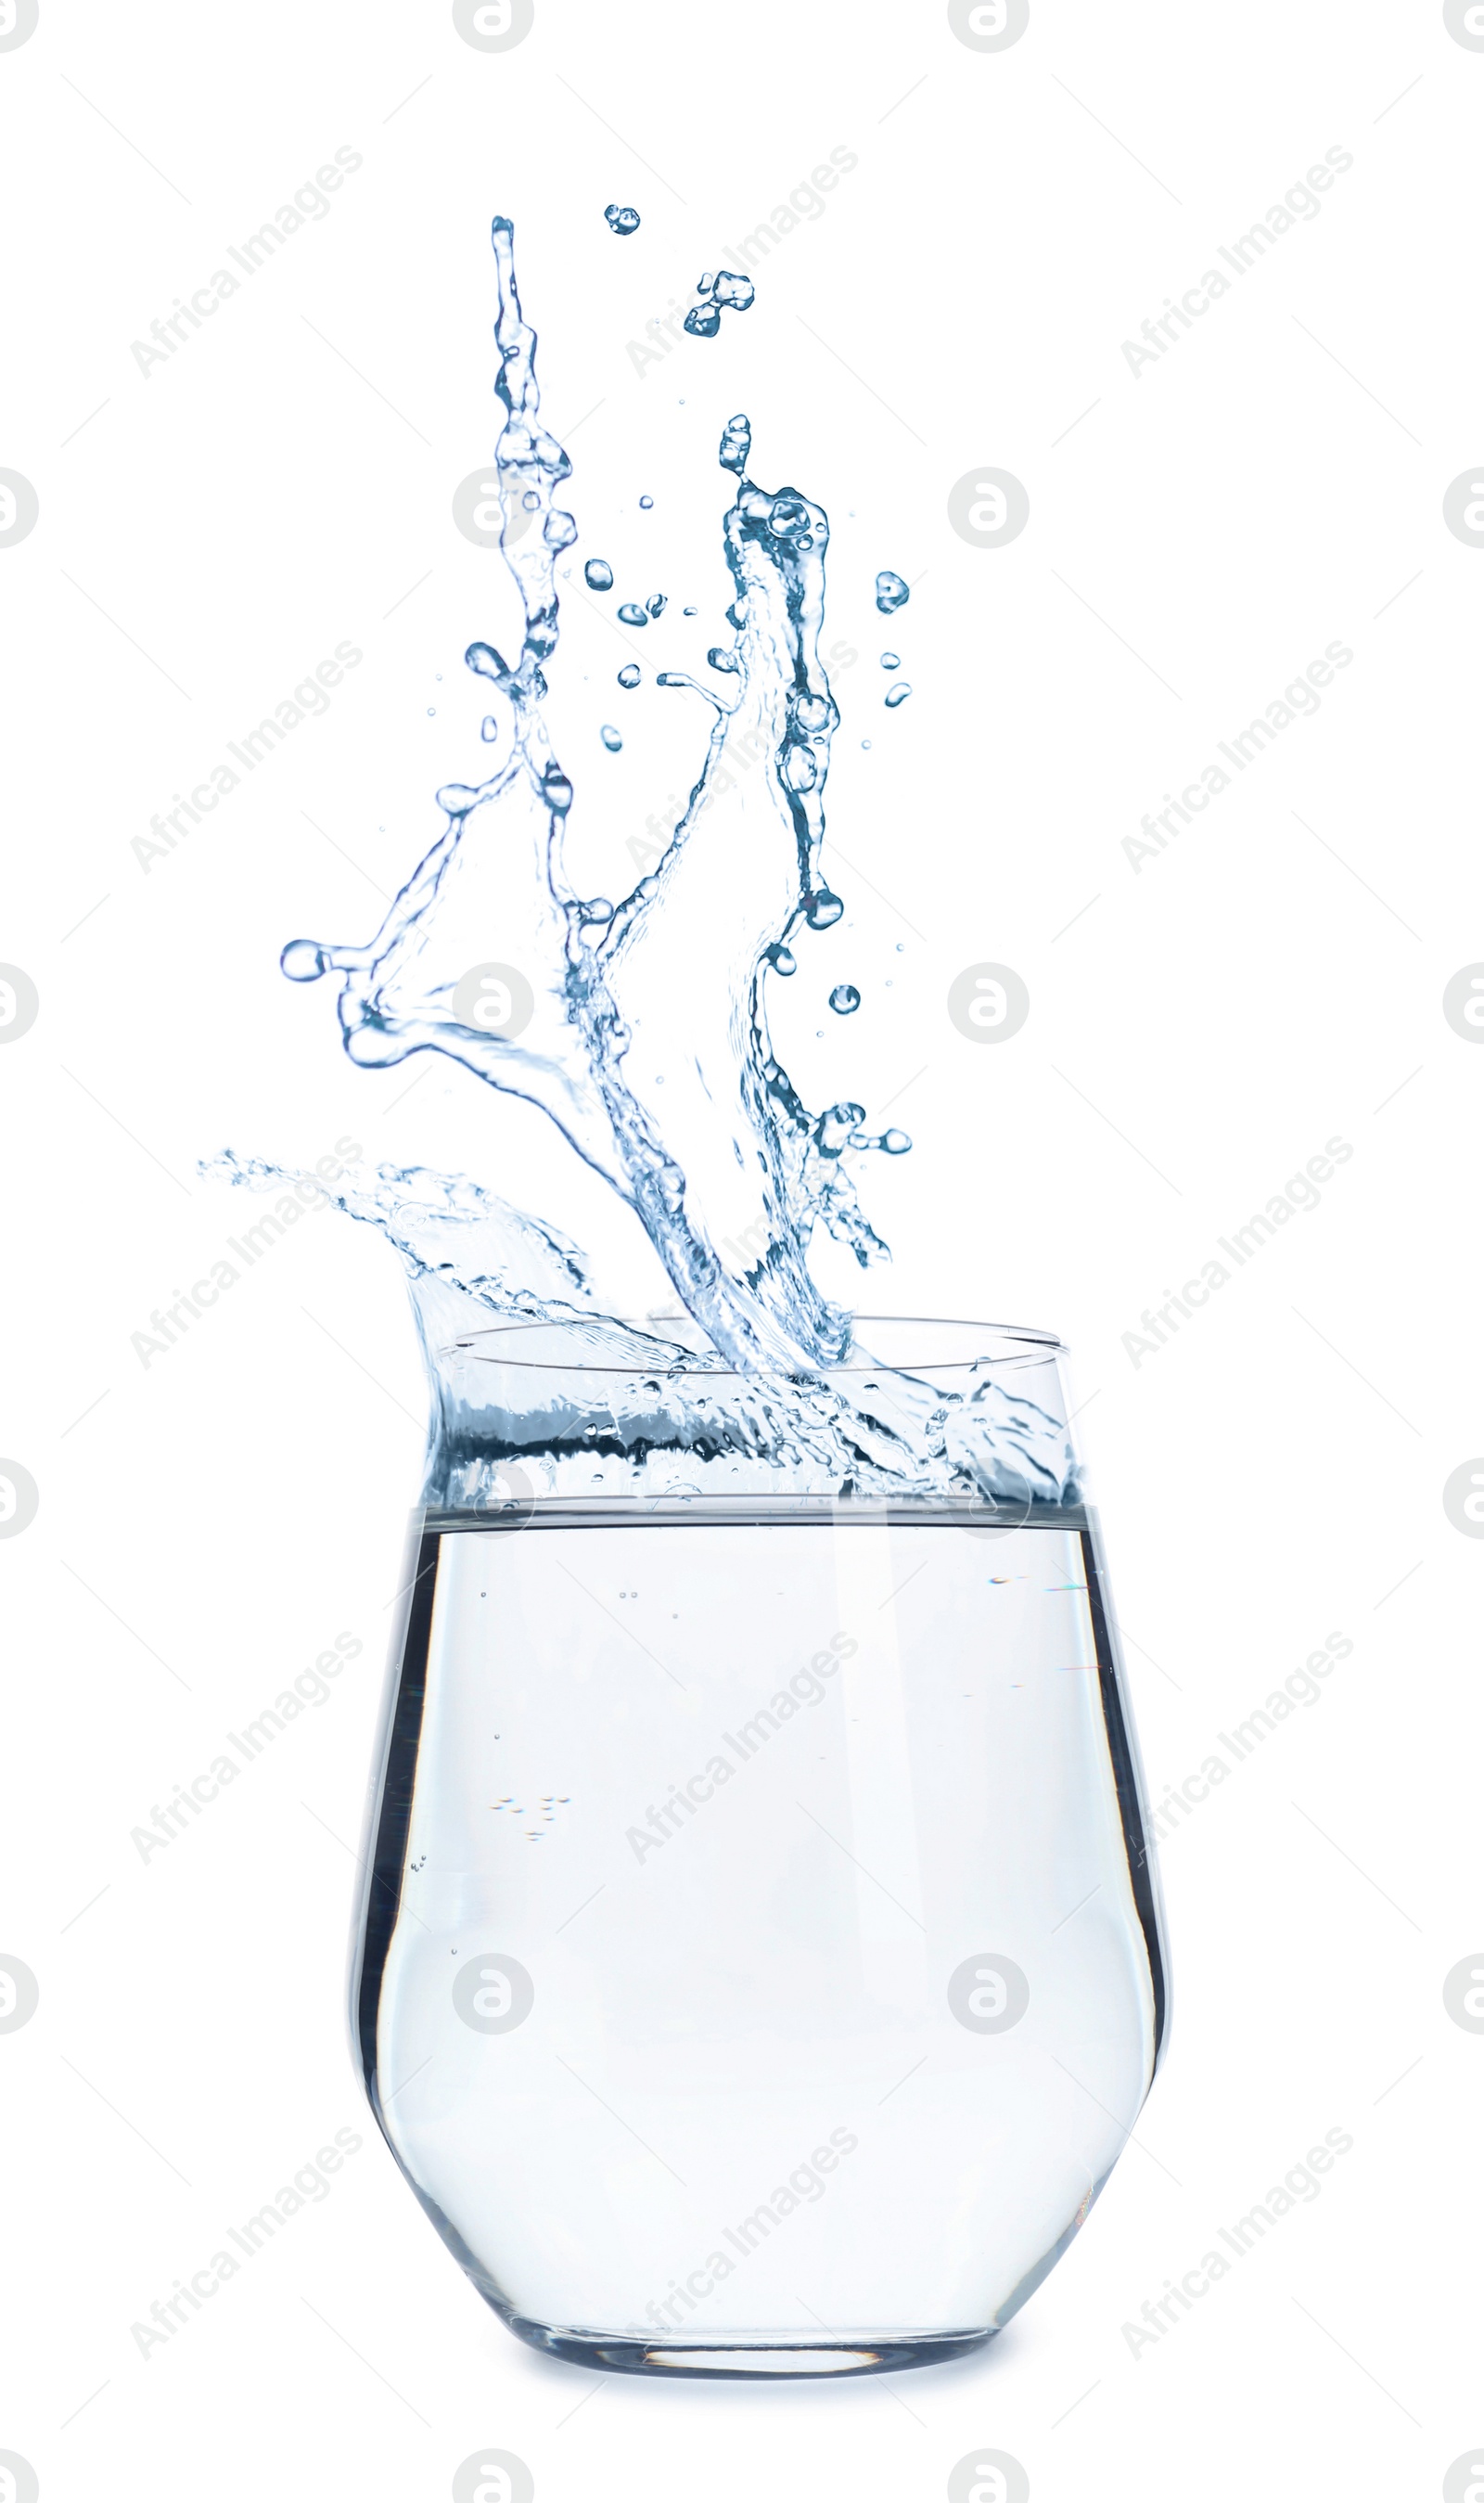 Image of Water splashing out of glass on white background. Refreshing drink